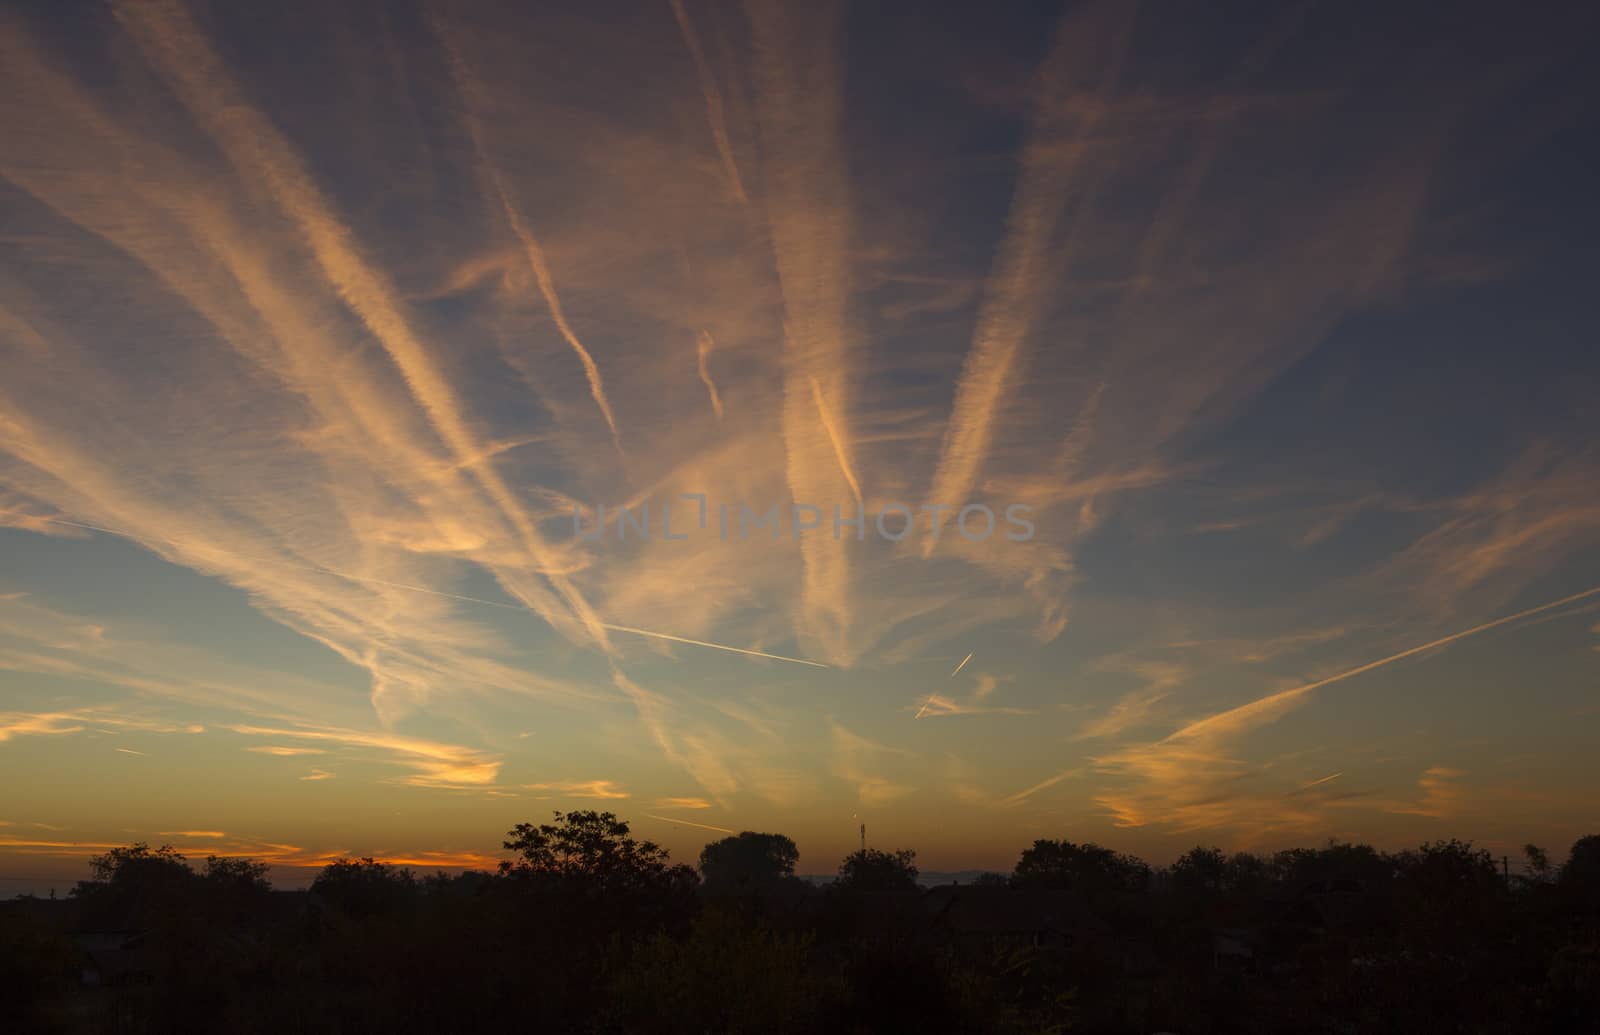 Airplane Trails on Morning Sunrise Cloudy Sky